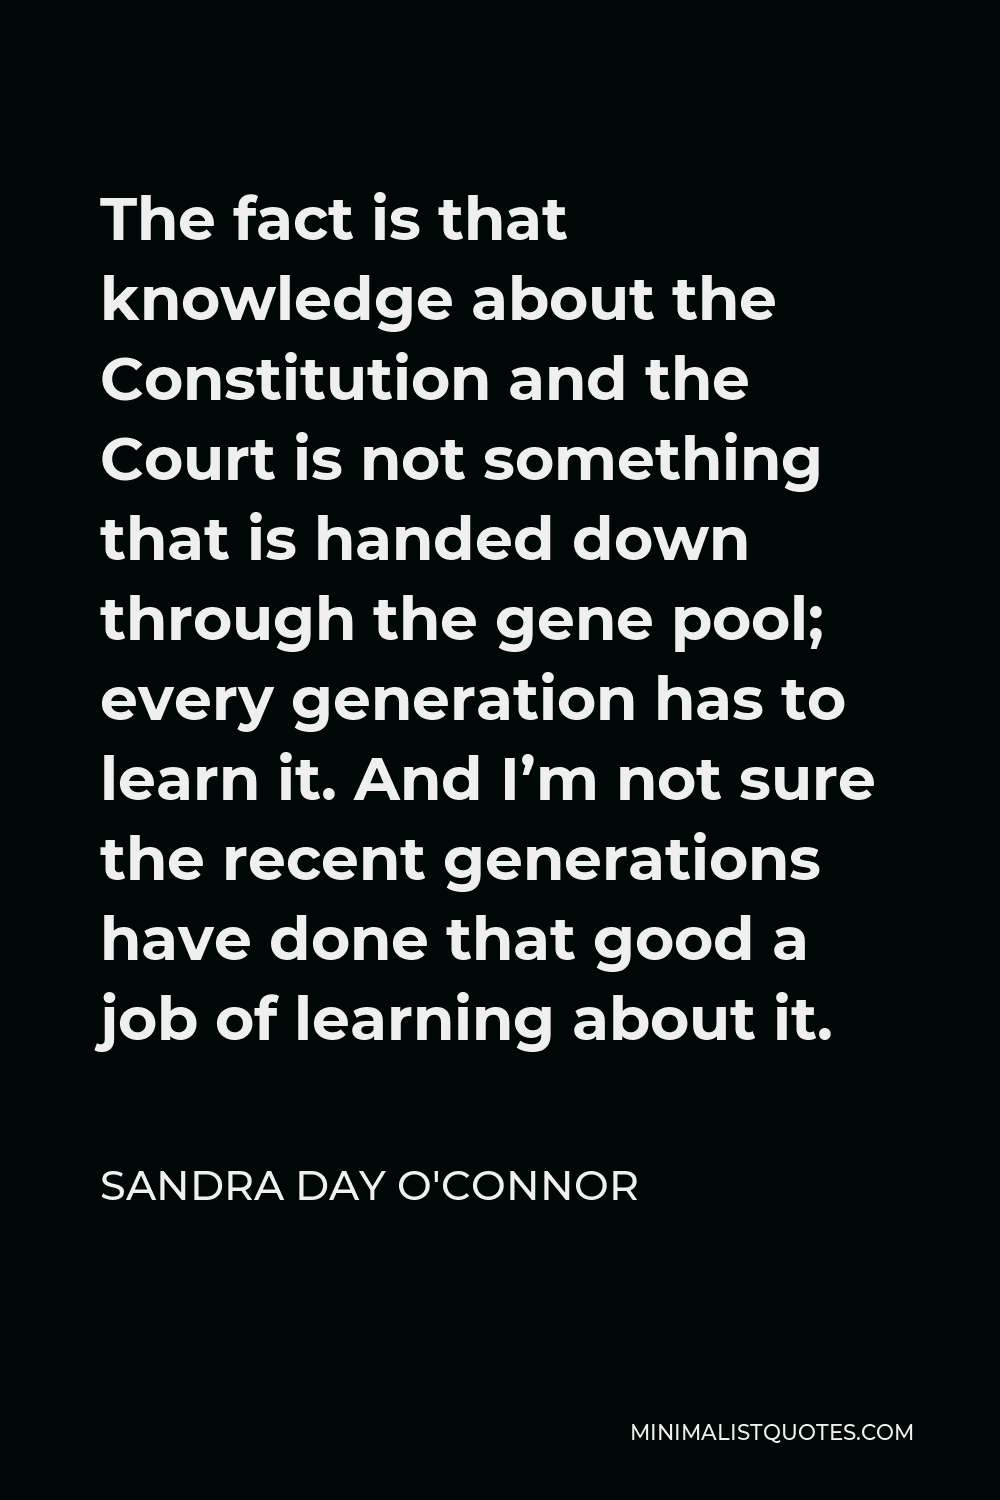 Sandra Day O'Connor Quote - The fact is that knowledge about the Constitution and the Court is not something that is handed down through the gene pool; every generation has to learn it. And I’m not sure the recent generations have done that good a job of learning about it.